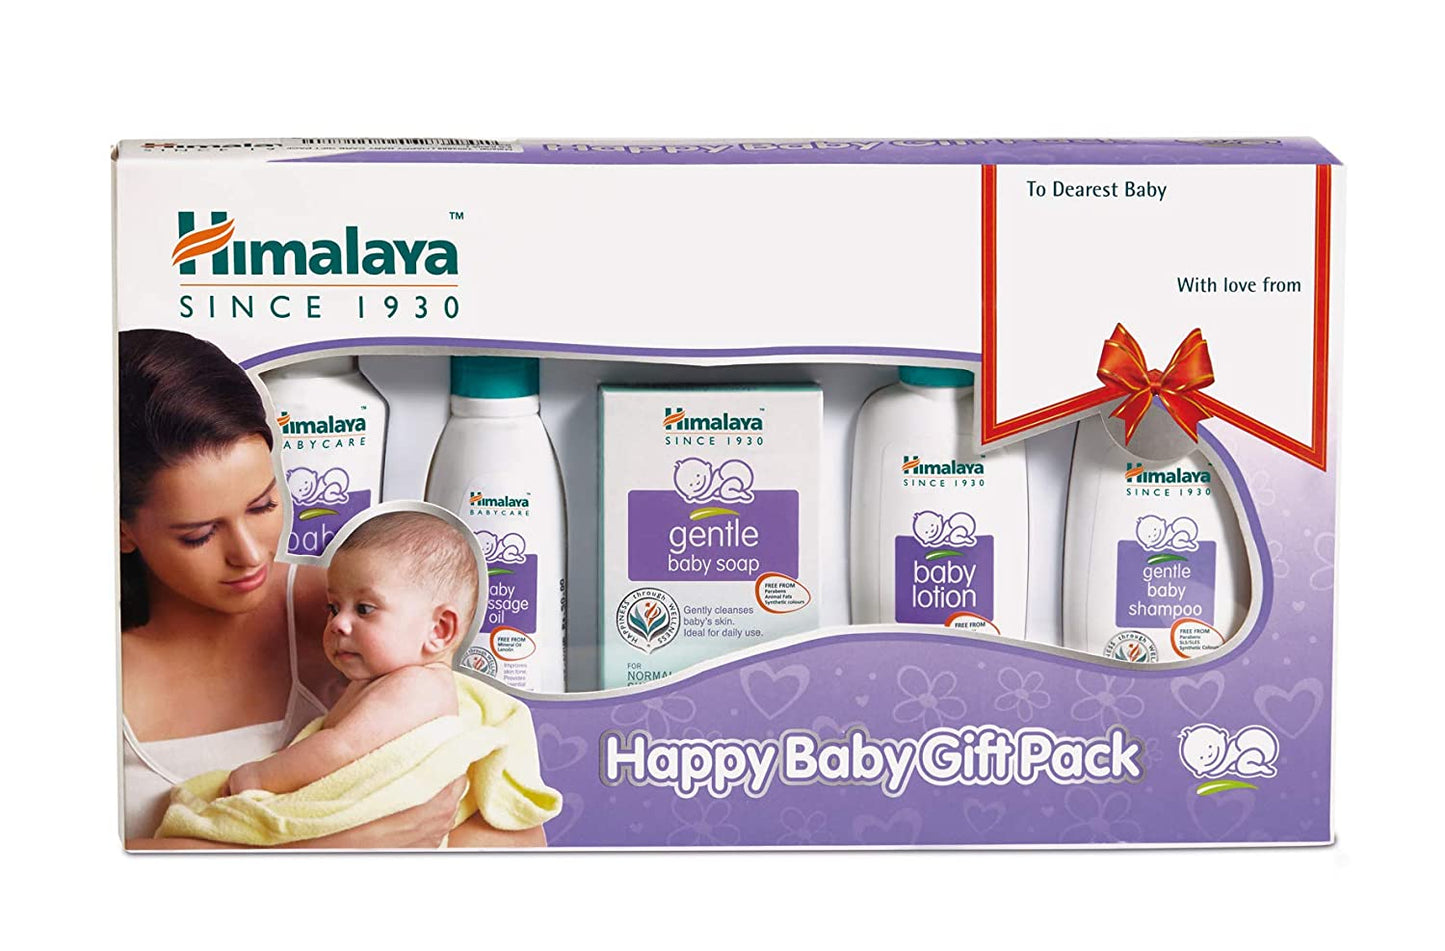 HAPPY BABY GIFT PACK 215RS 1 PCS